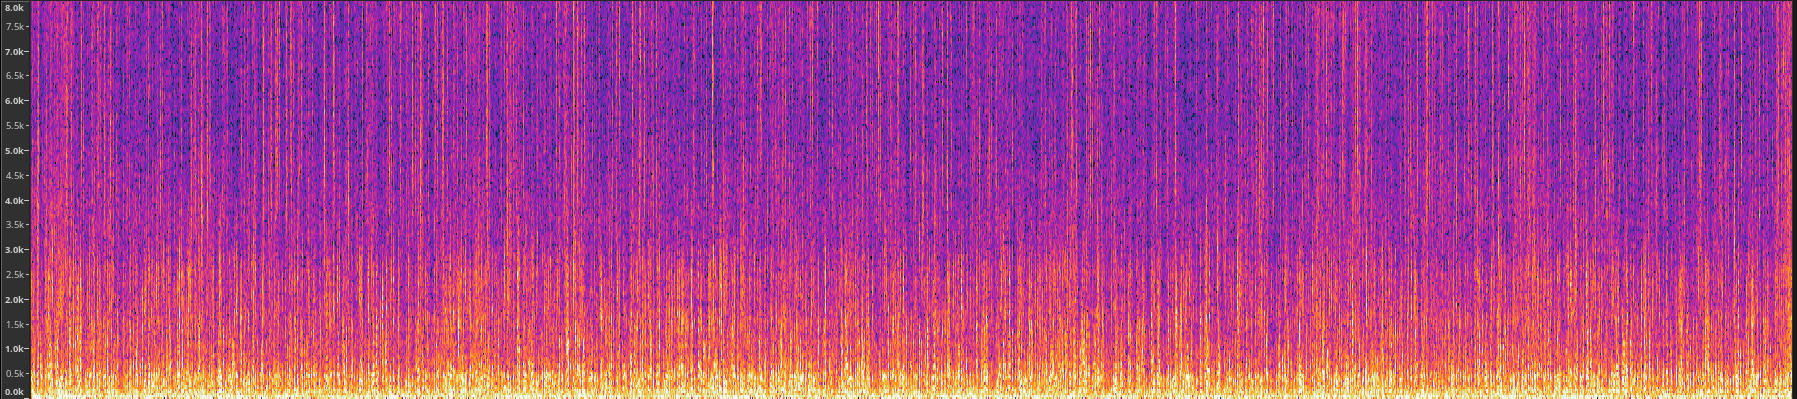 A spectrogram showing a high level of intensity across all frequencies over time